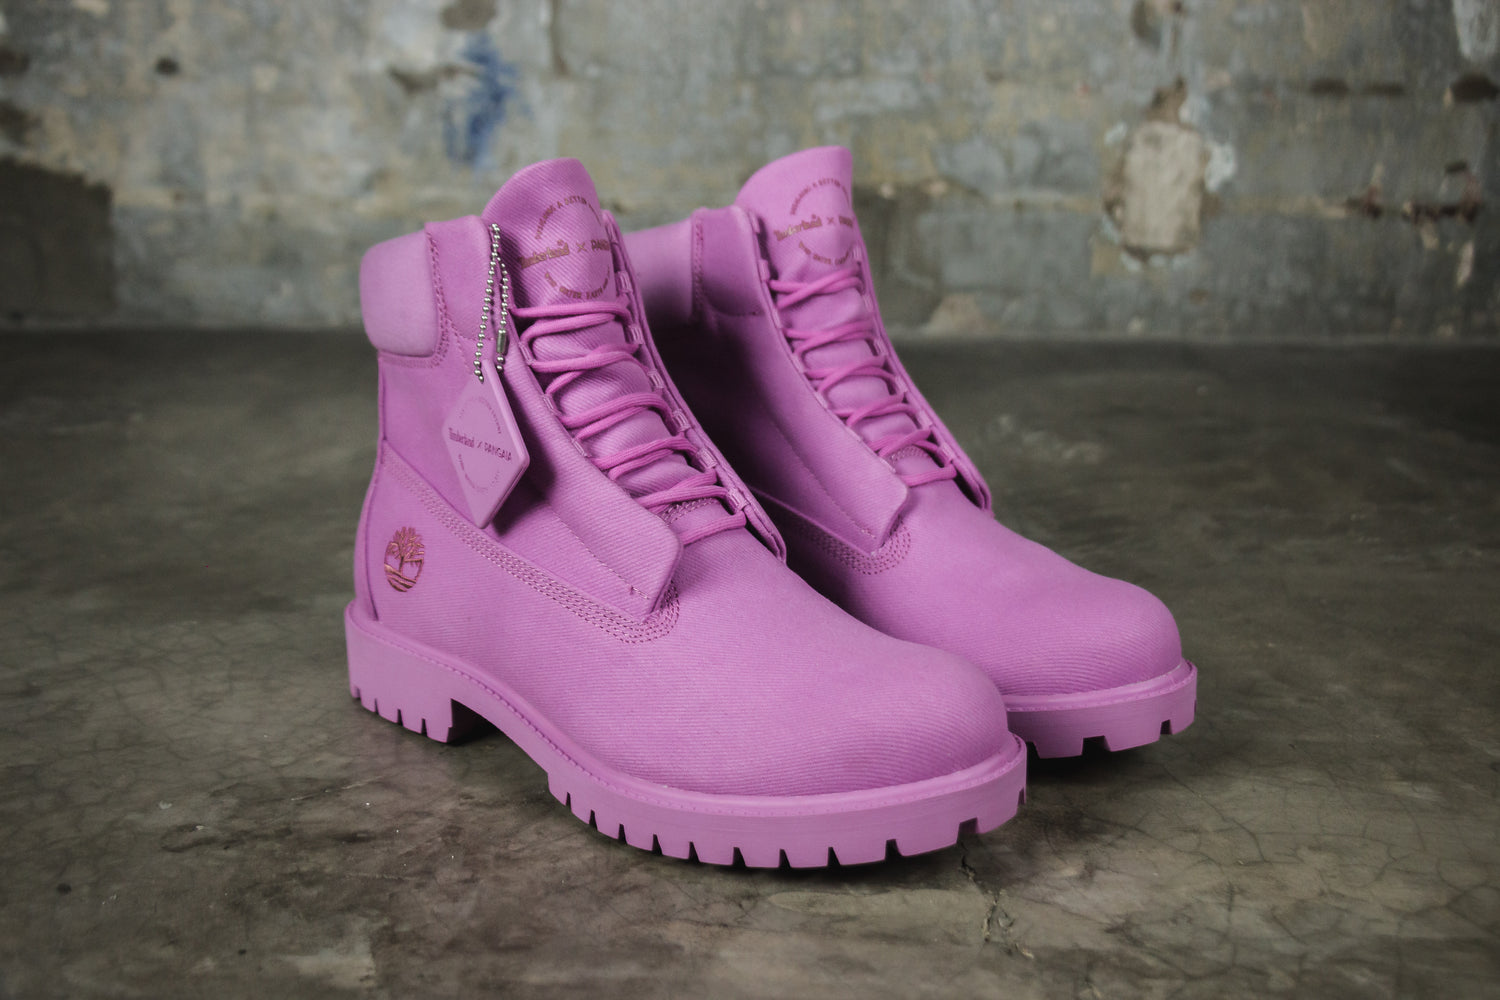 Pangaia x Timberland 6IN Boots (6855447904322)